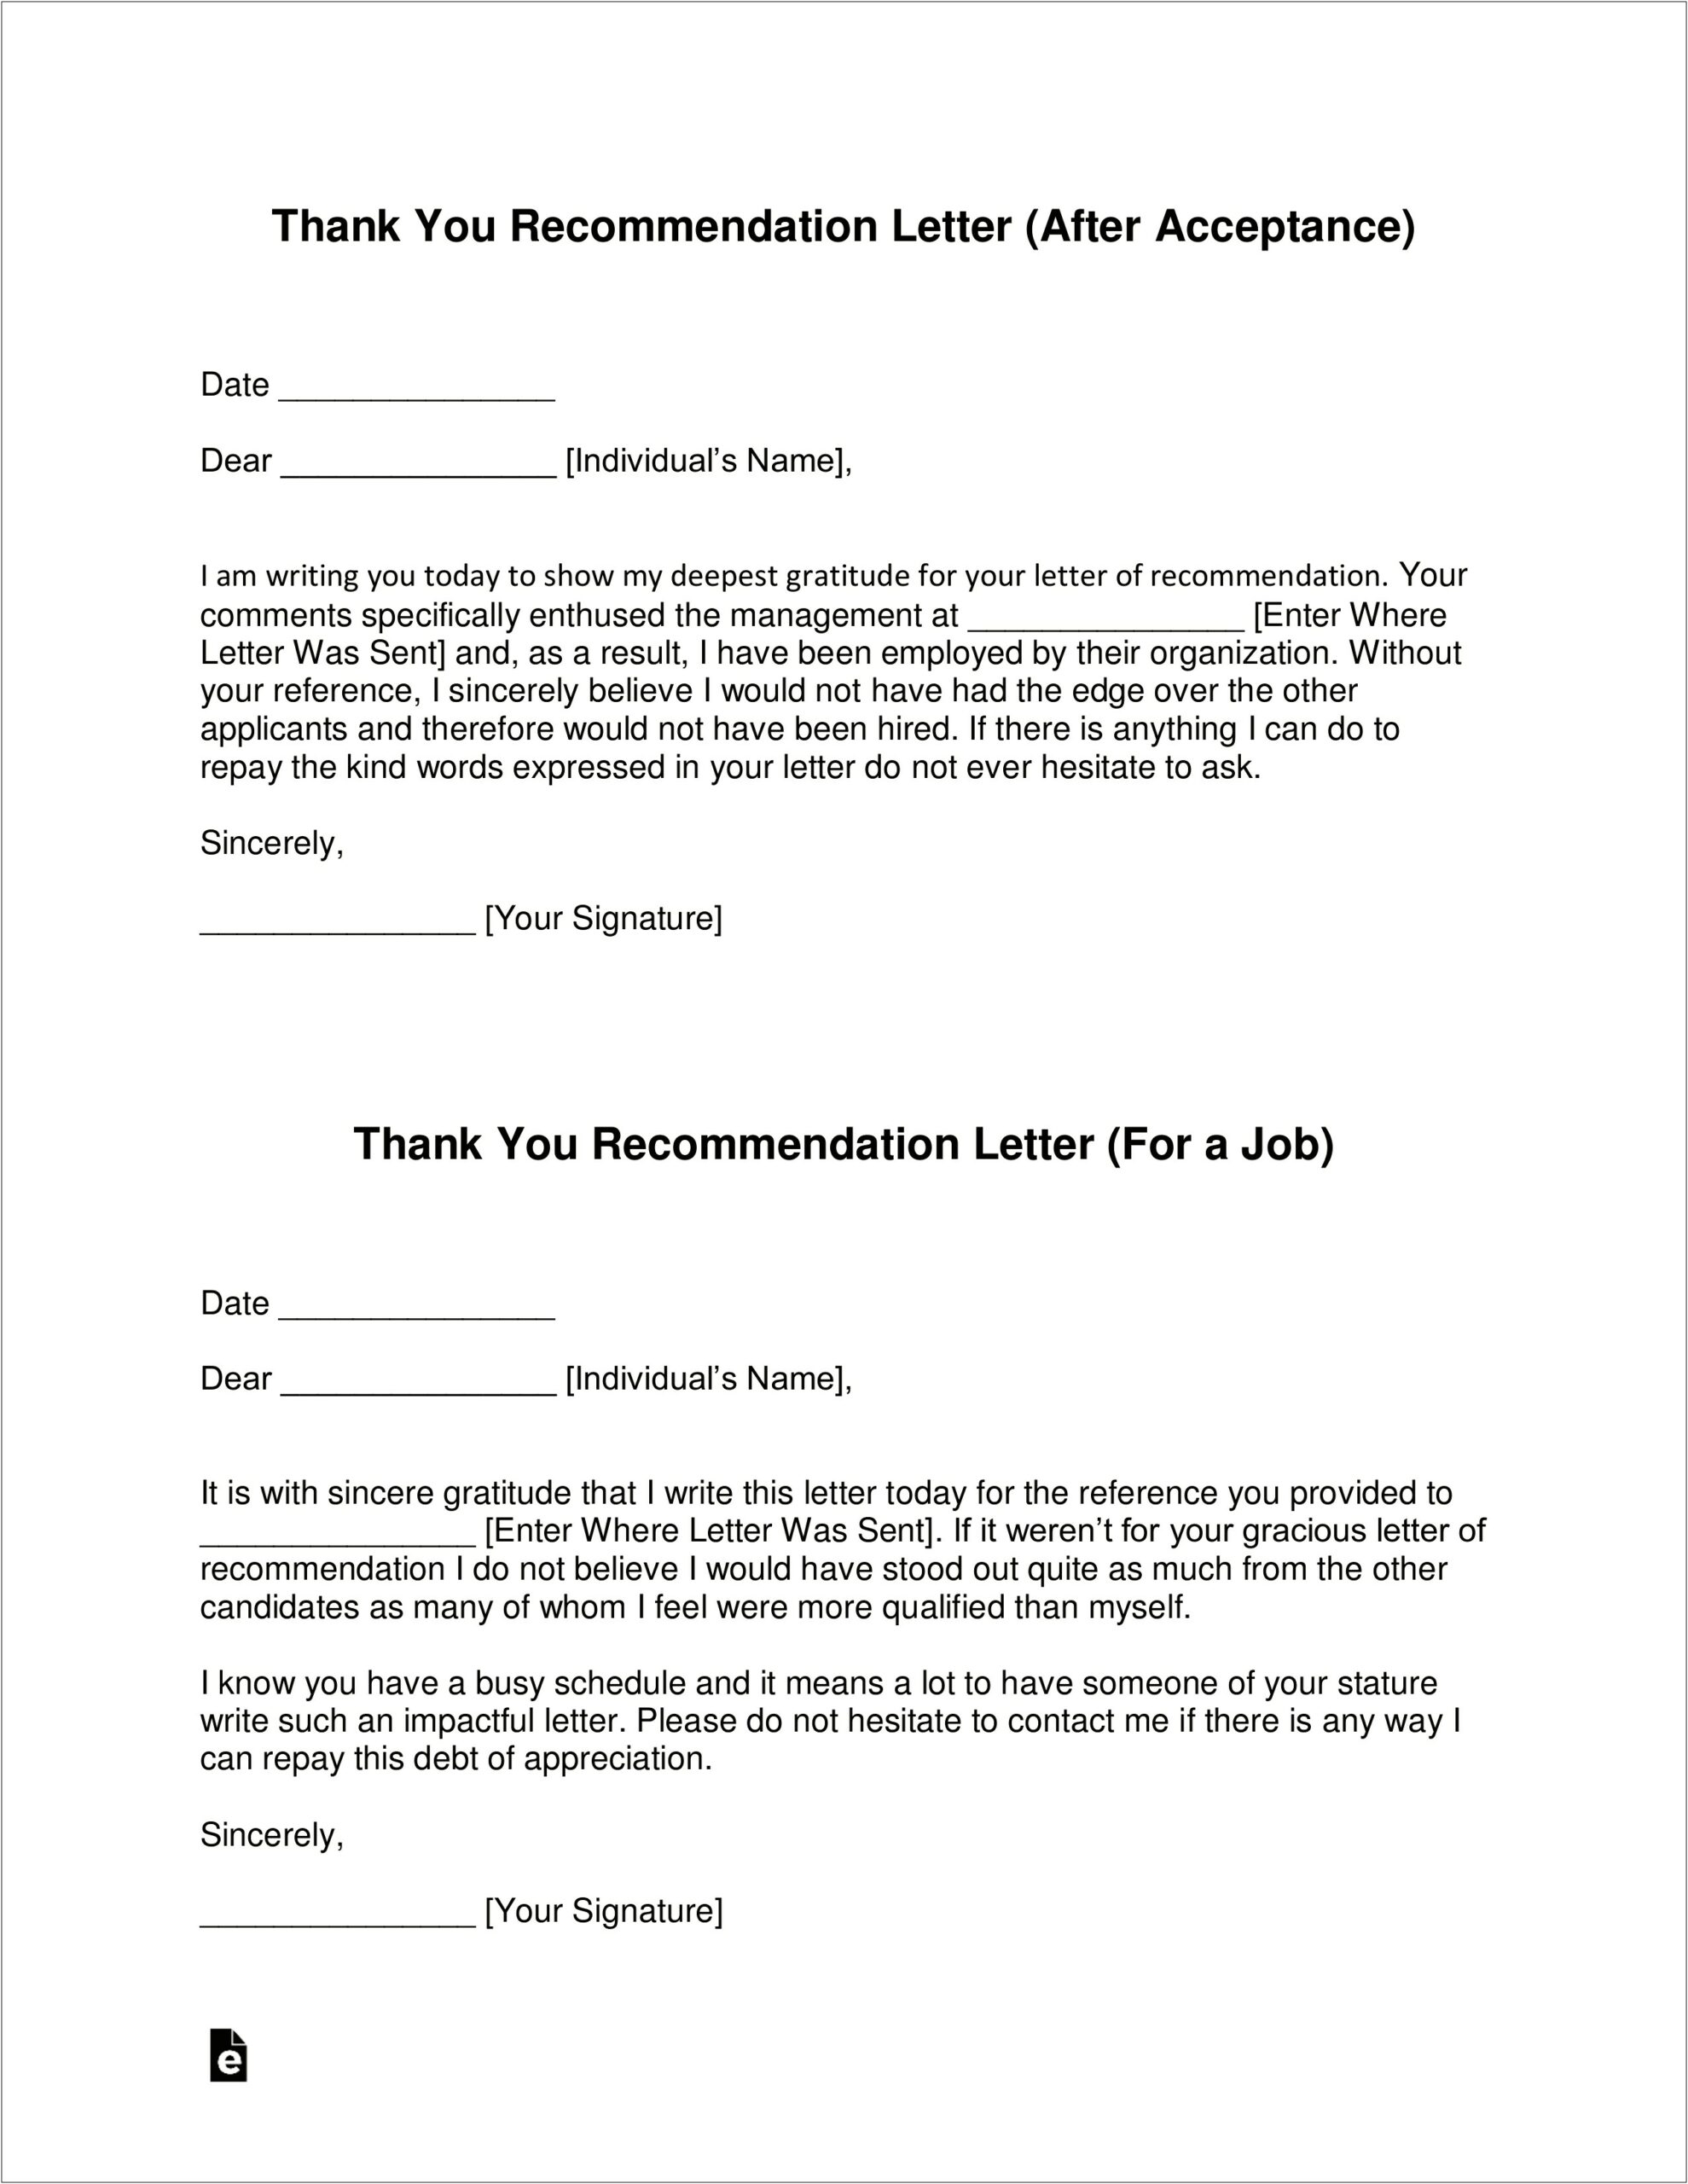 Doctor To Doctor Referral Thank You Letter Template